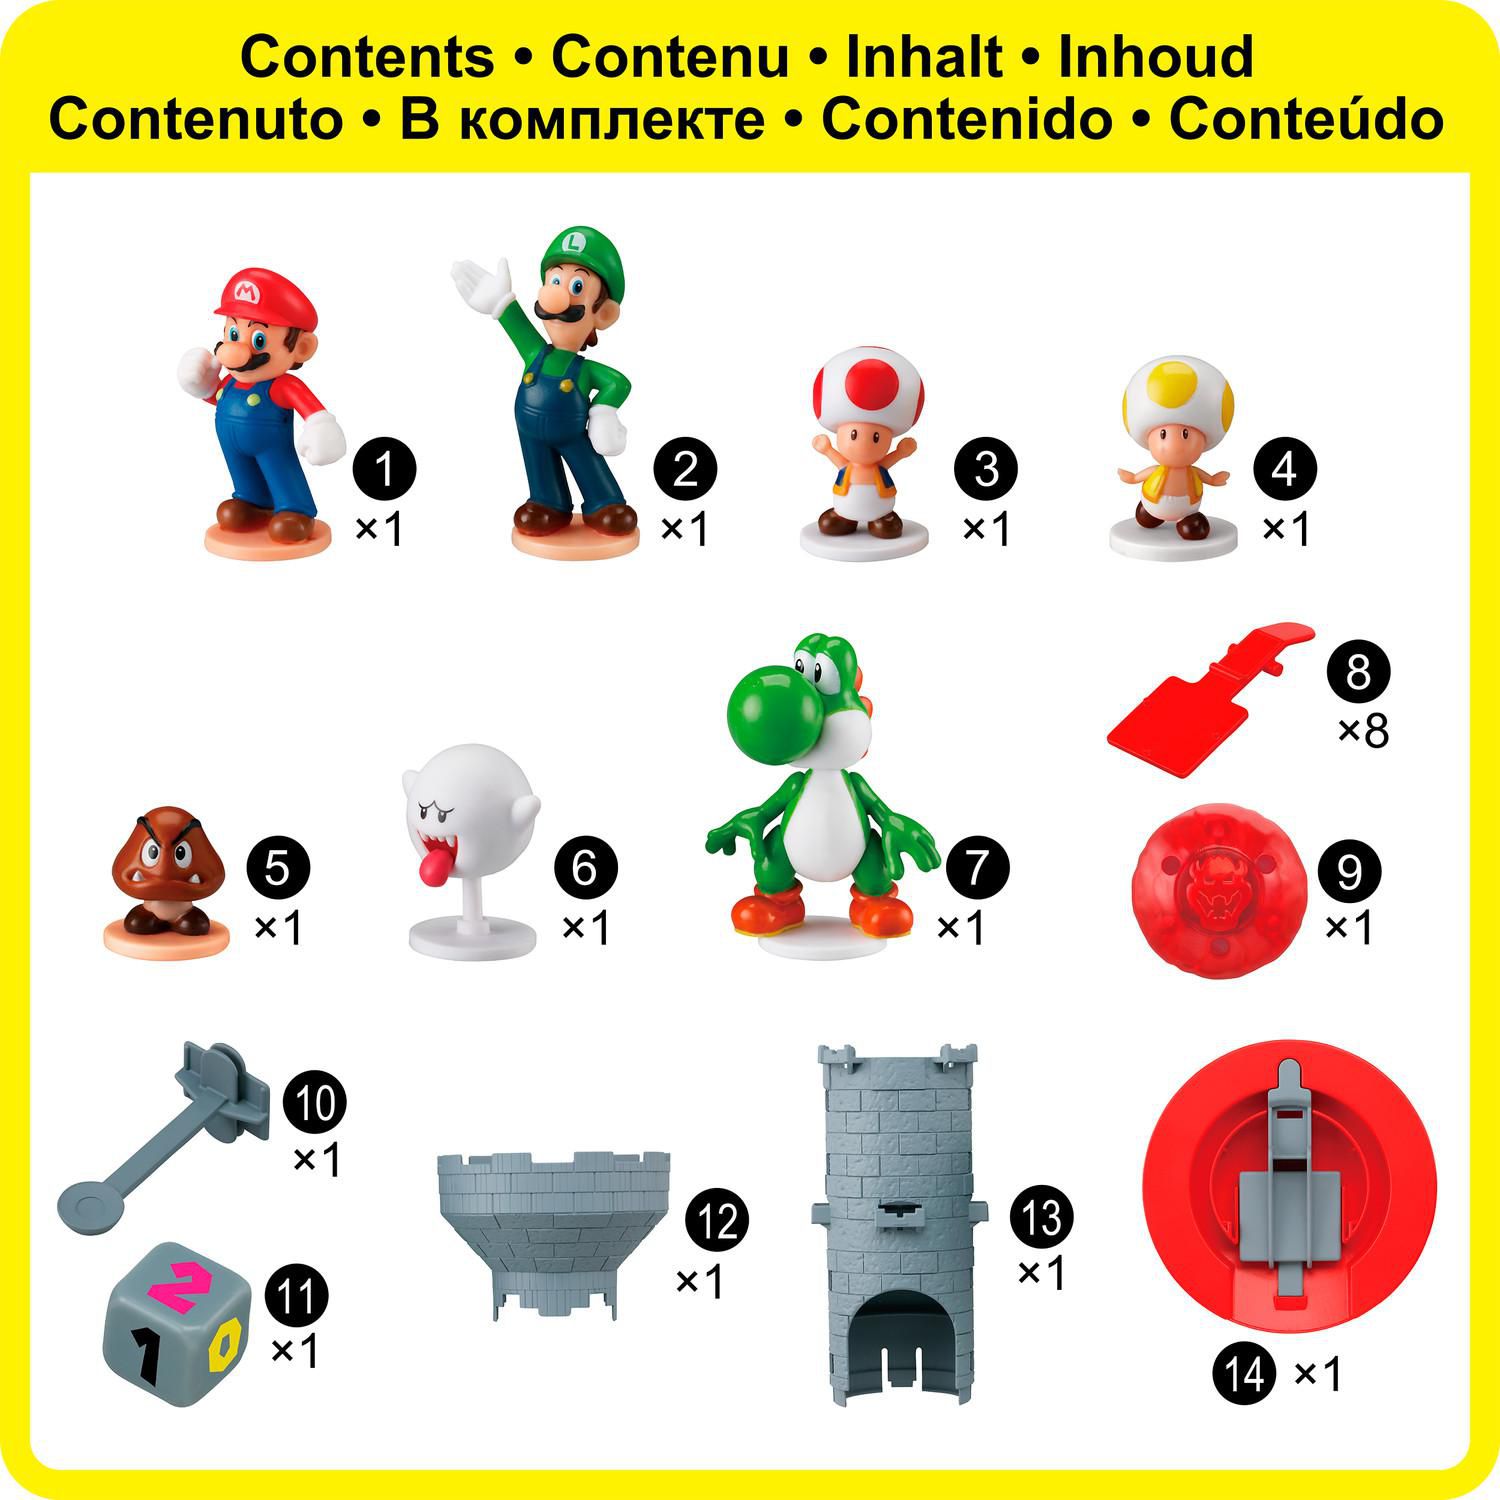 Blow　Shaky　Mario　and　Super　Games　Epoch　Shaky　Game,　Mario　Up!　Figures,　Super　Action　Game　Tabletop　Tower　Action　Balancing　with　Tower　Skill　Collectible　Mario　Super　Game